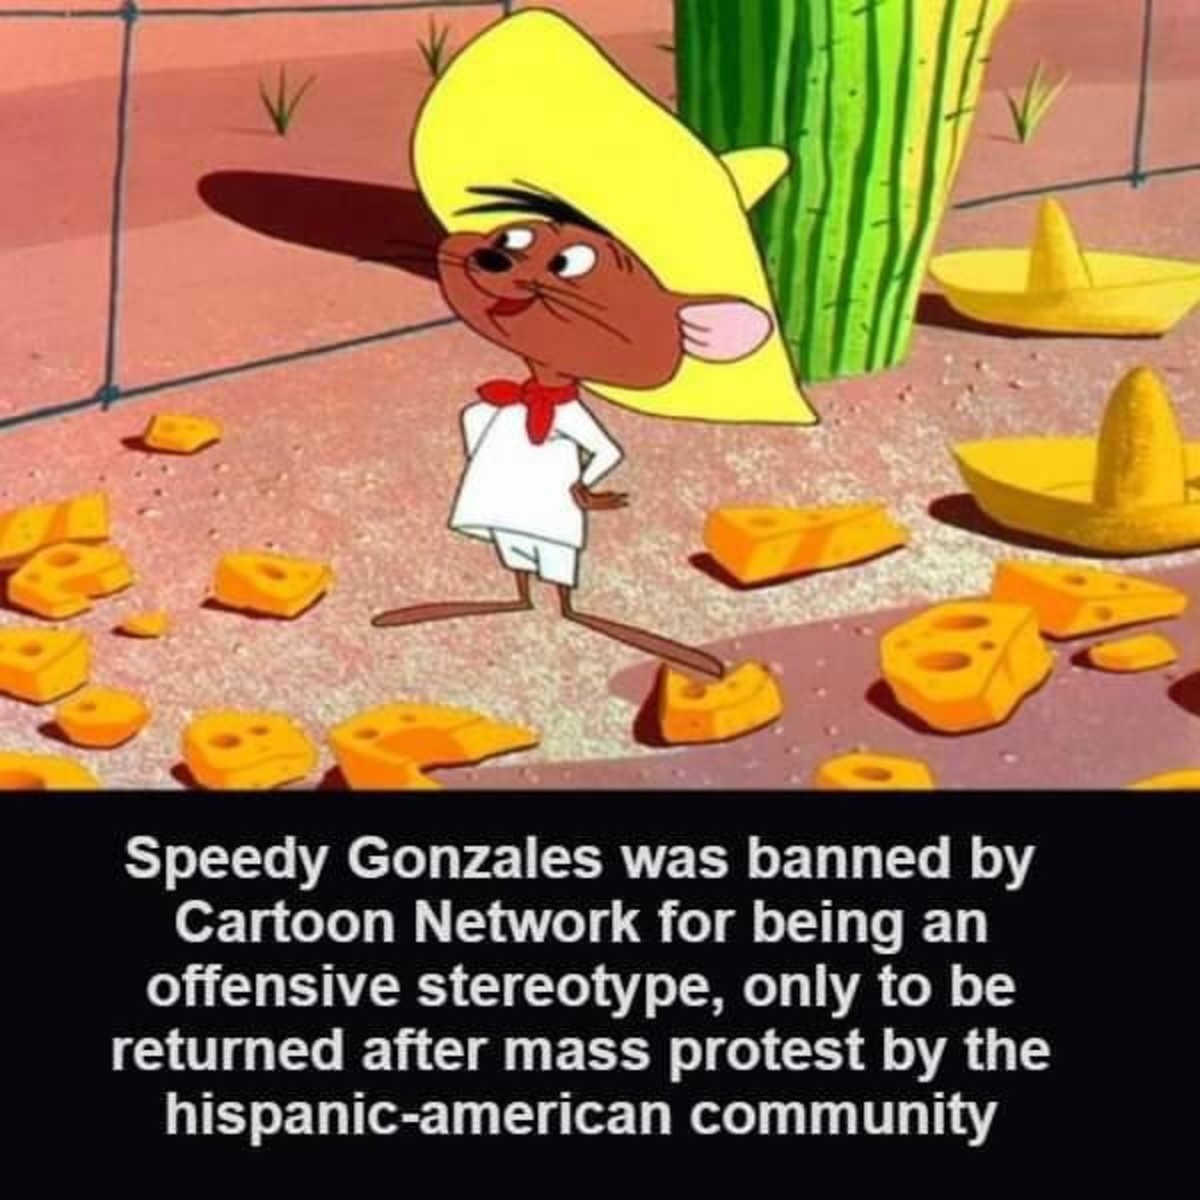 speedy gonzales 1955 - Speedy Gonzales was banned by Cartoon Network for being an offensive stereotype, only to be returned after mass protest by the hispanicamerican community